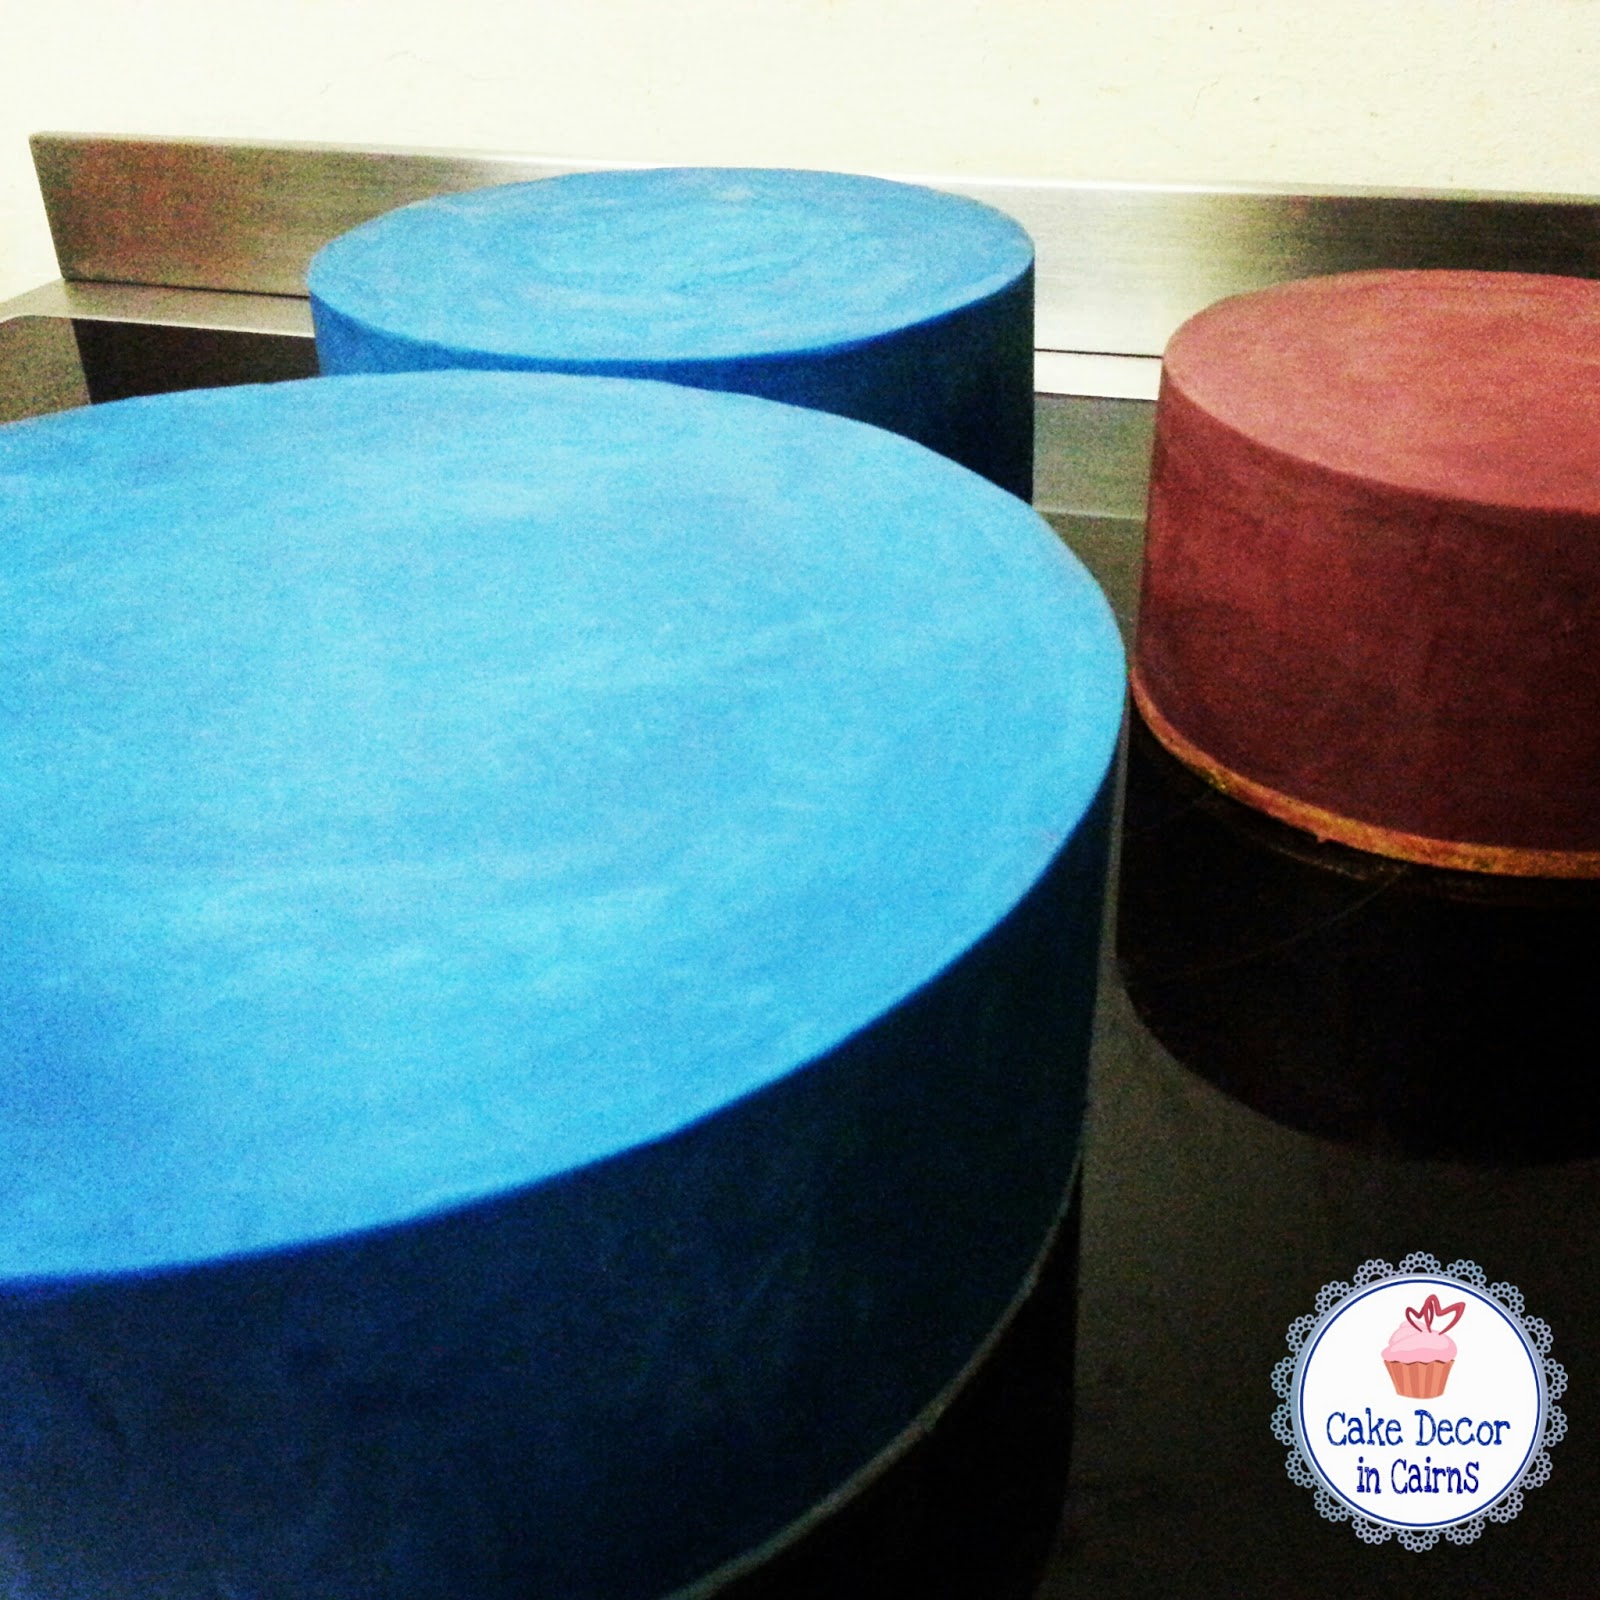 Blue and Maroon tinted / coloured / colored ganache cakes